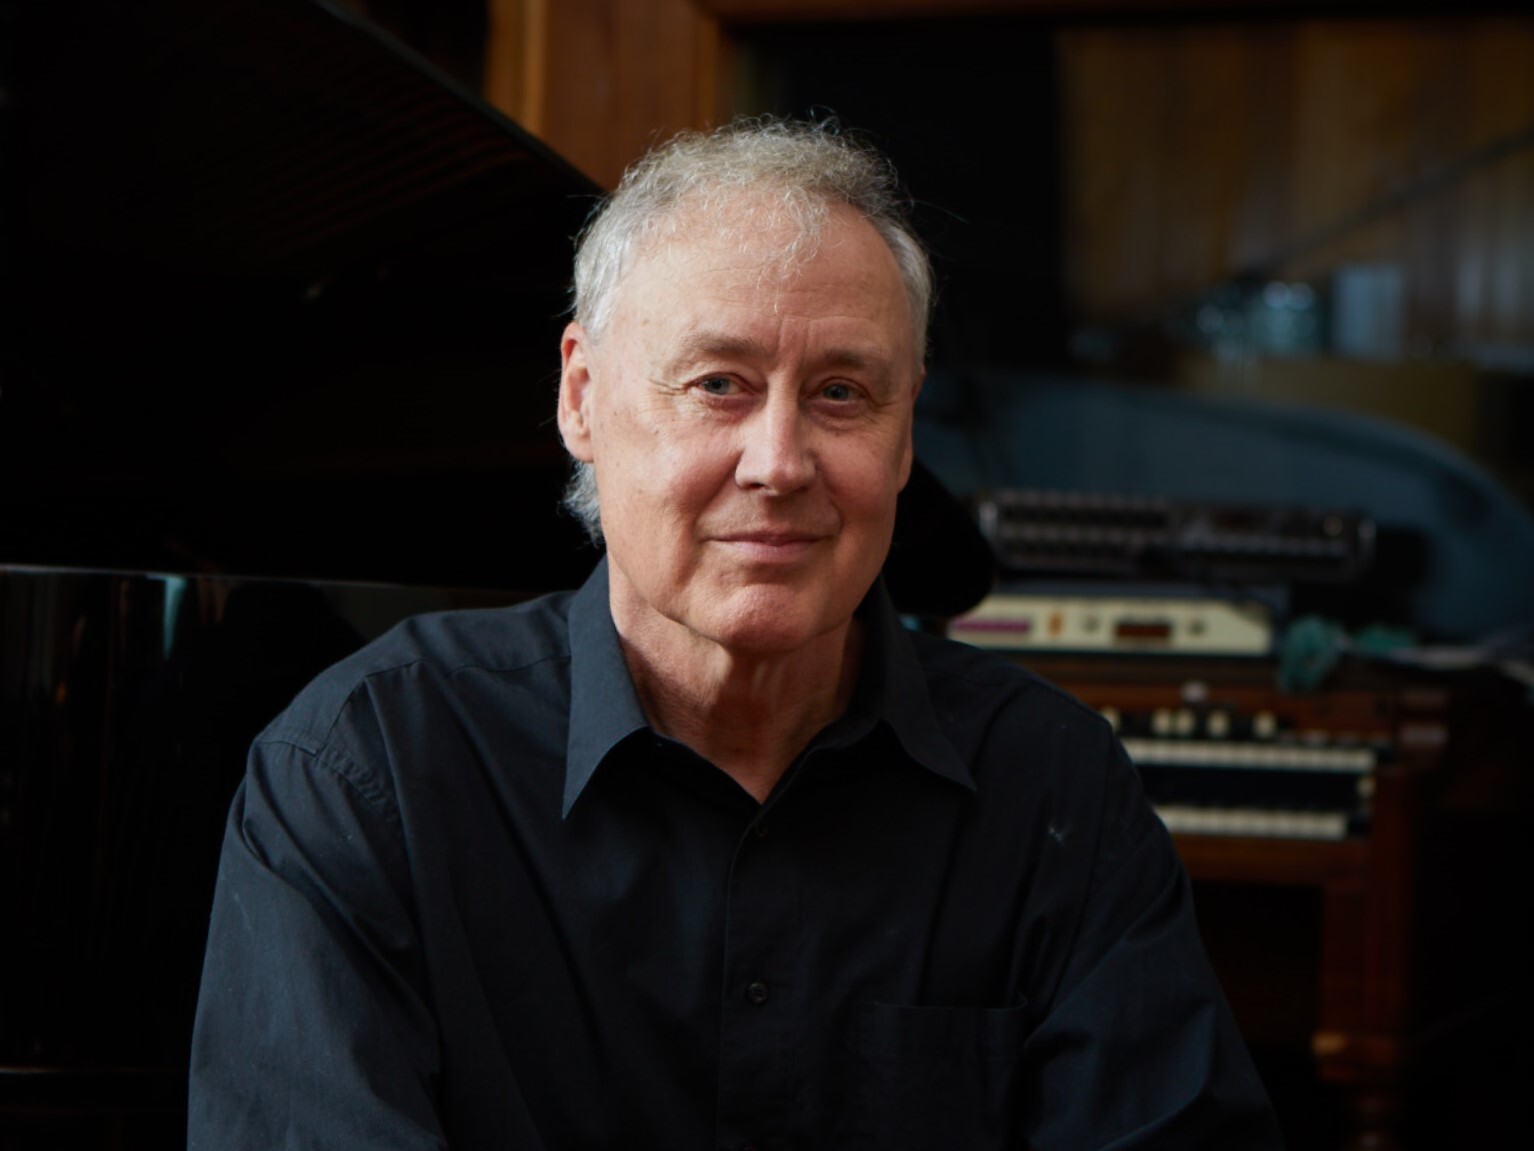 Singer Bruce Hornsby sits in front of a piano and organ